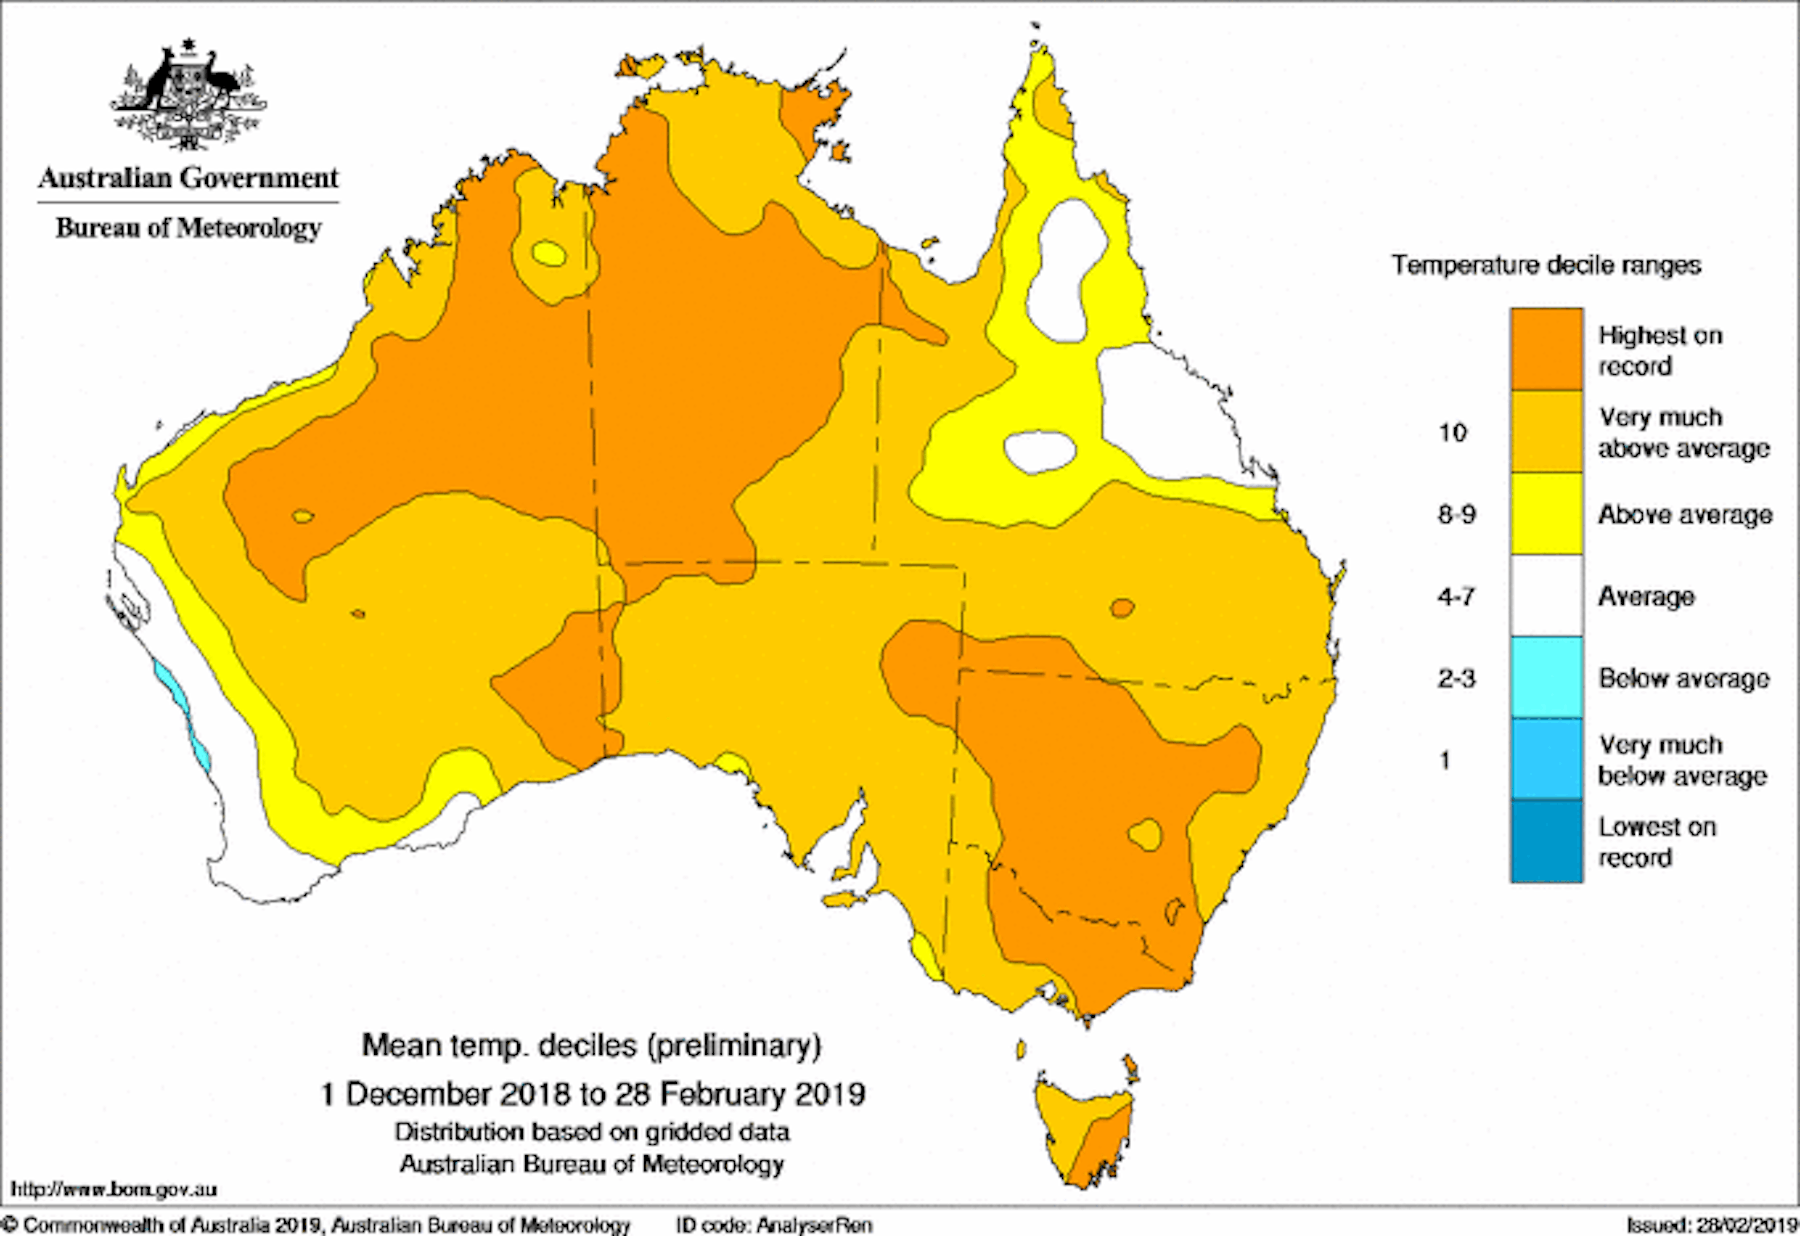 201819 was Australia’s hottest summer on record, with a warm autumn